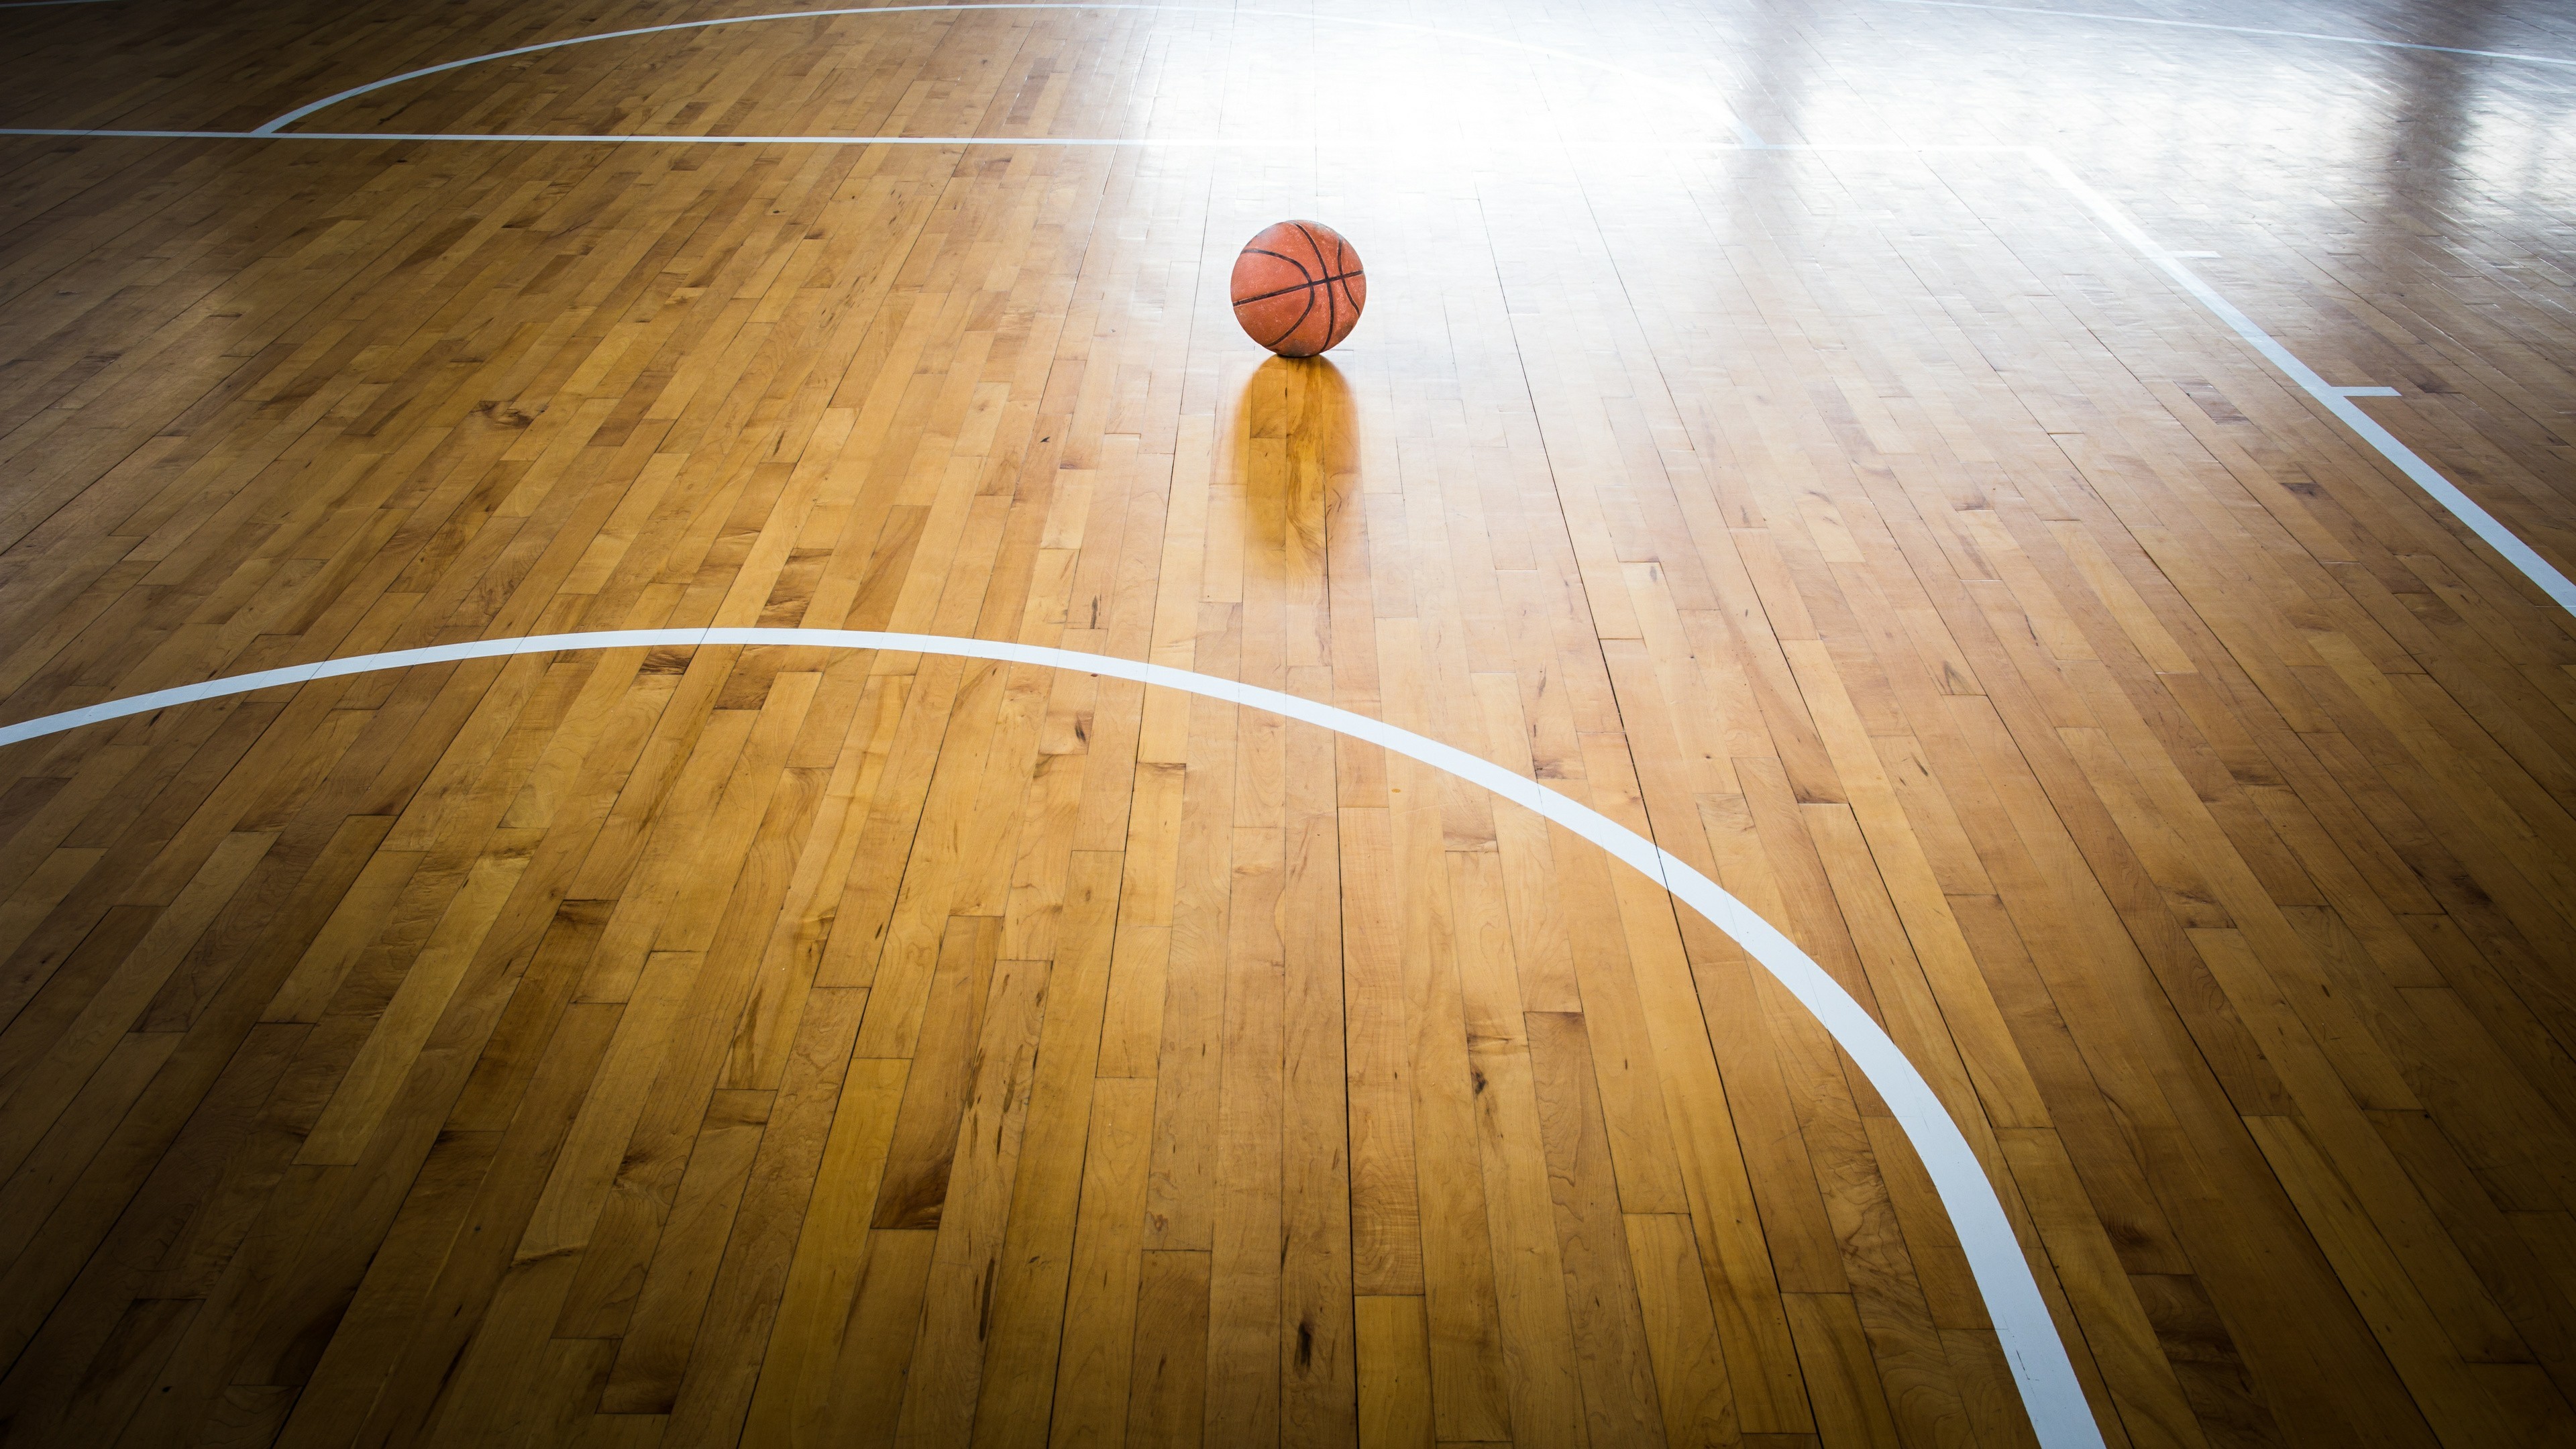 Download Basketball Court wallpapers for mobile phone free Basketball  Court HD pictures